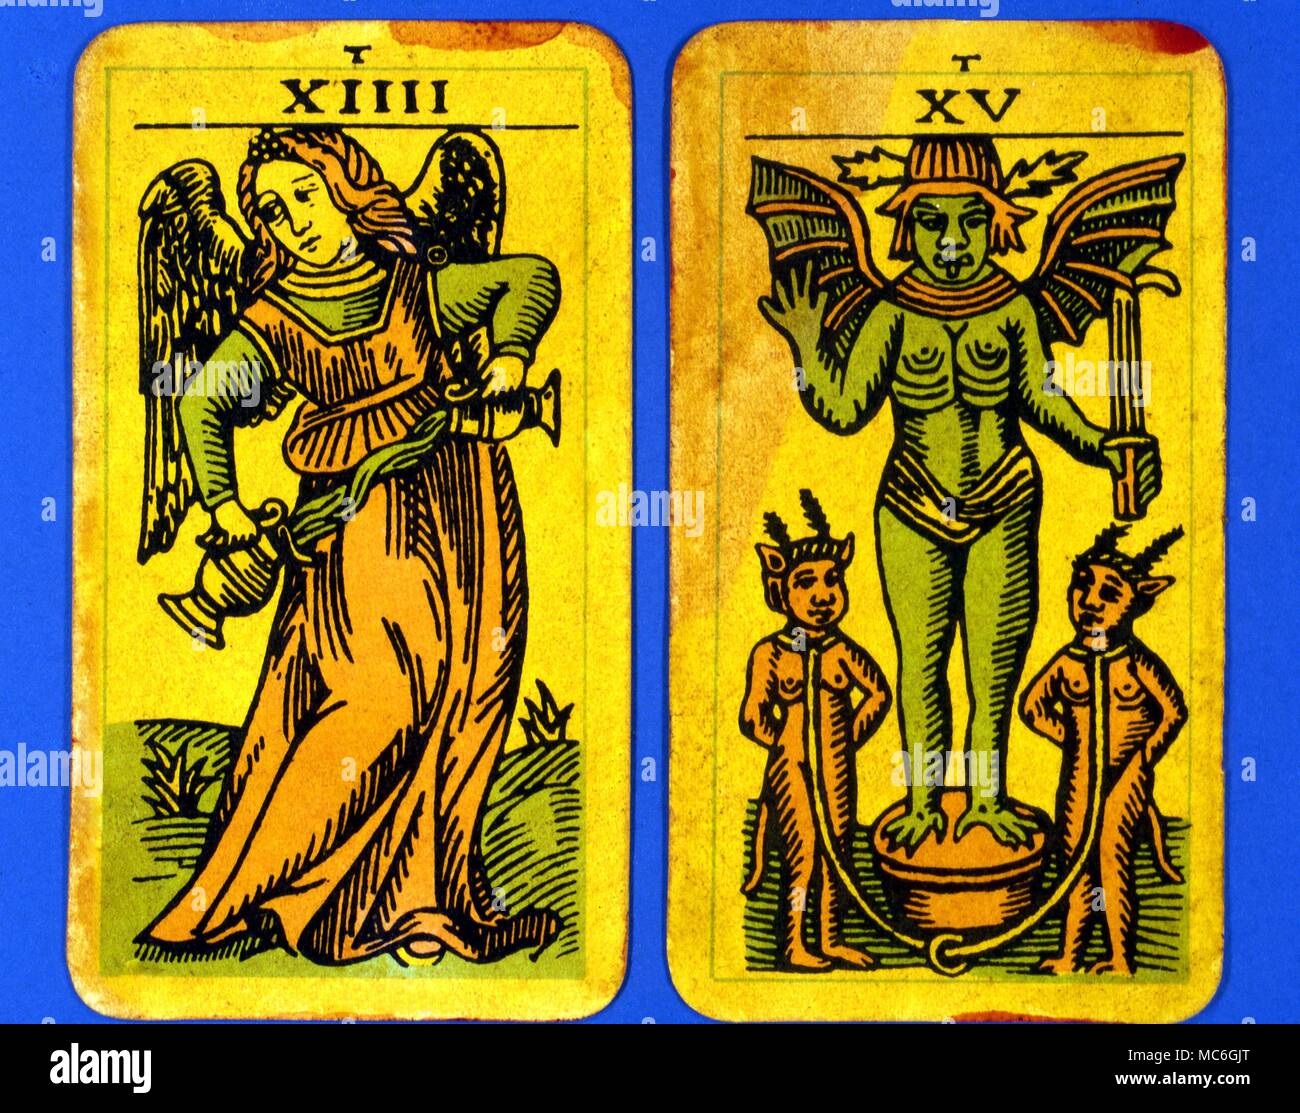 Tarot Cards-Majo Arcana- The Parisian Tarot. Card 14. The Temperance and  Card 15. The Devil, The Death Card. Two cards from a Major Arcana picture  Tarot, probably designed in an archaizing style